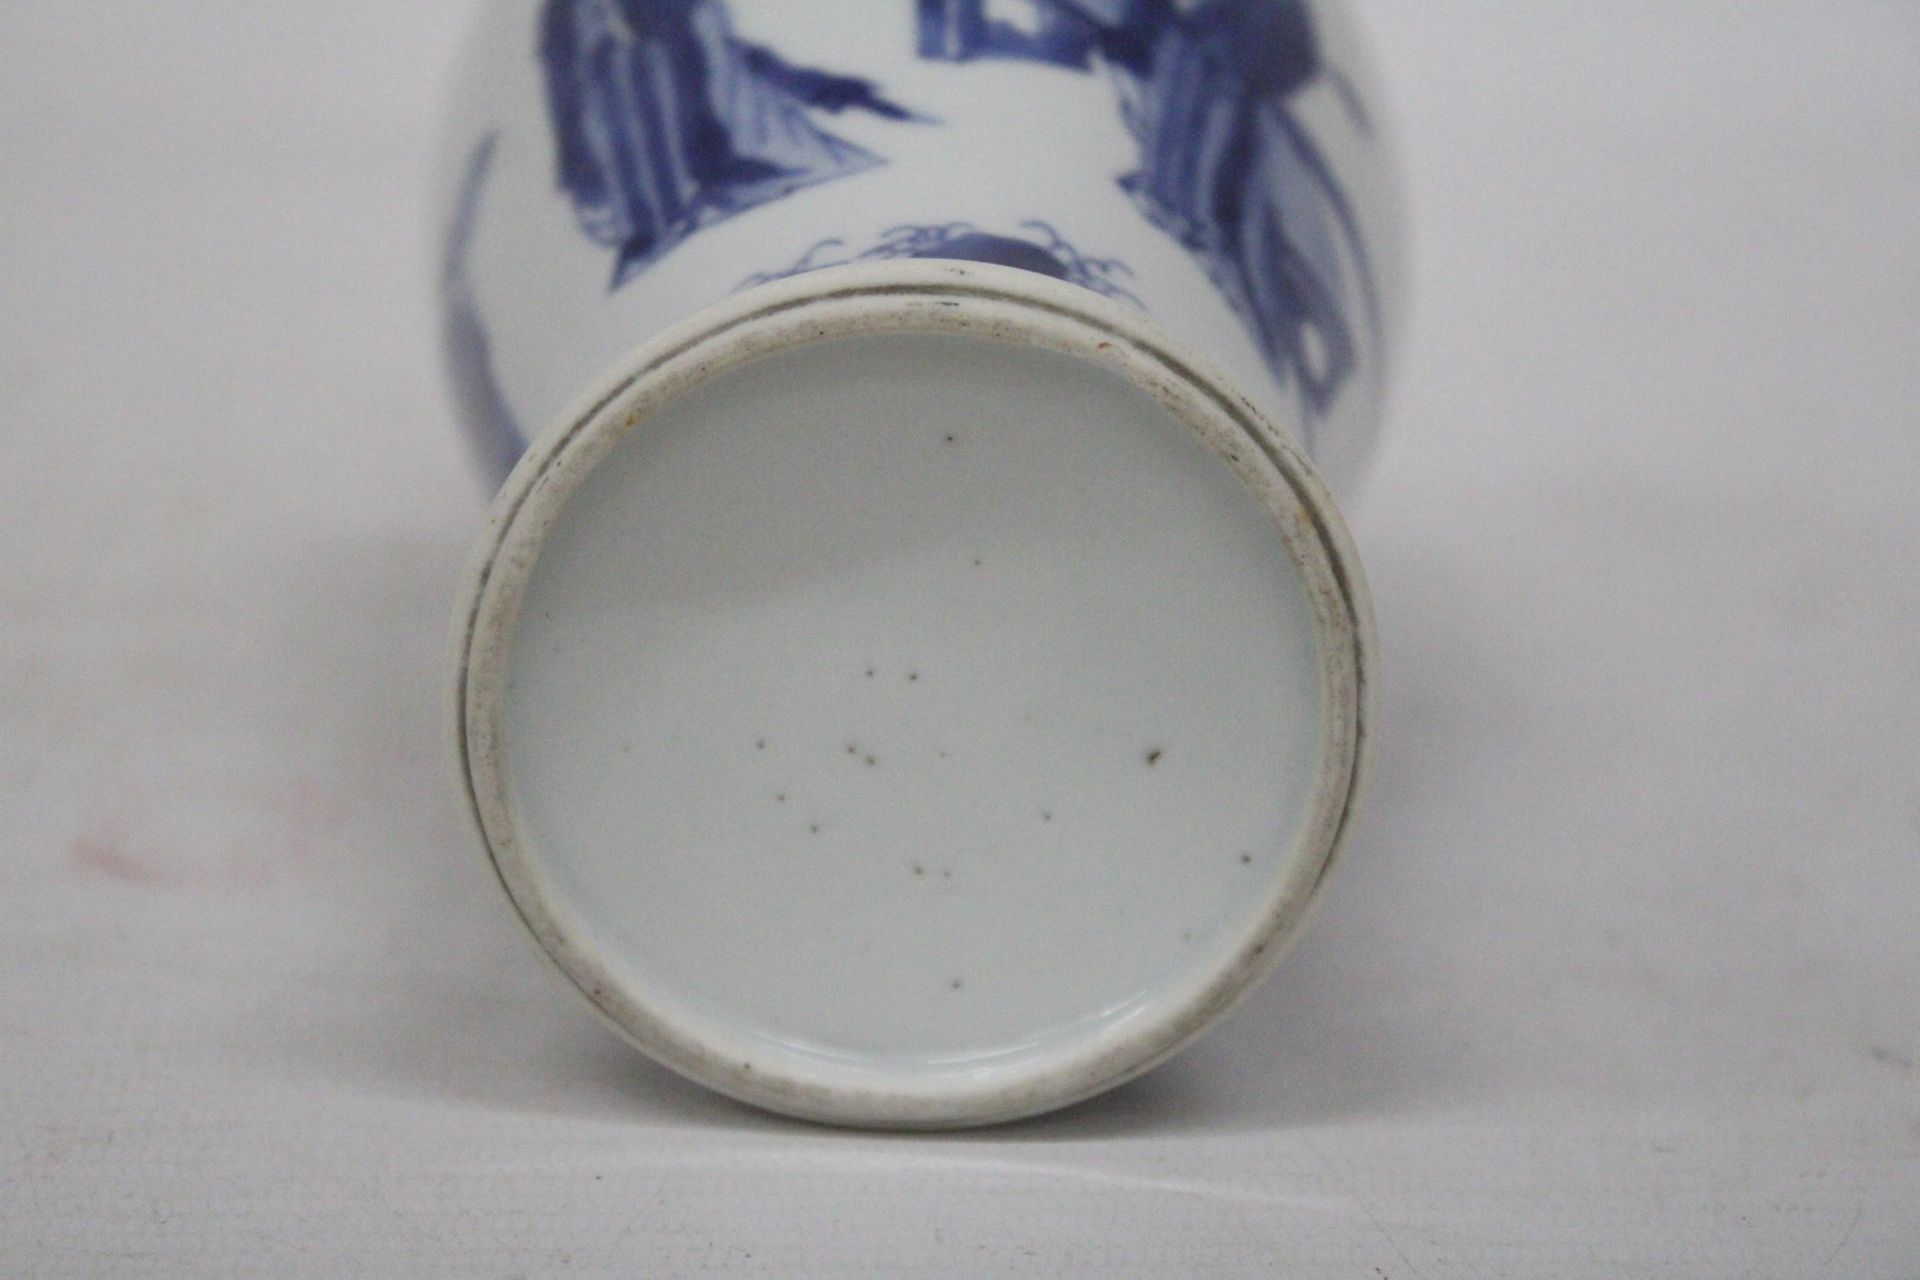 A CHINESE KANGXI PERIOD (1661 - 1722) BLUE AND WHITE PORCELAIN VASE HEIGHT 19CM - Image 7 of 7